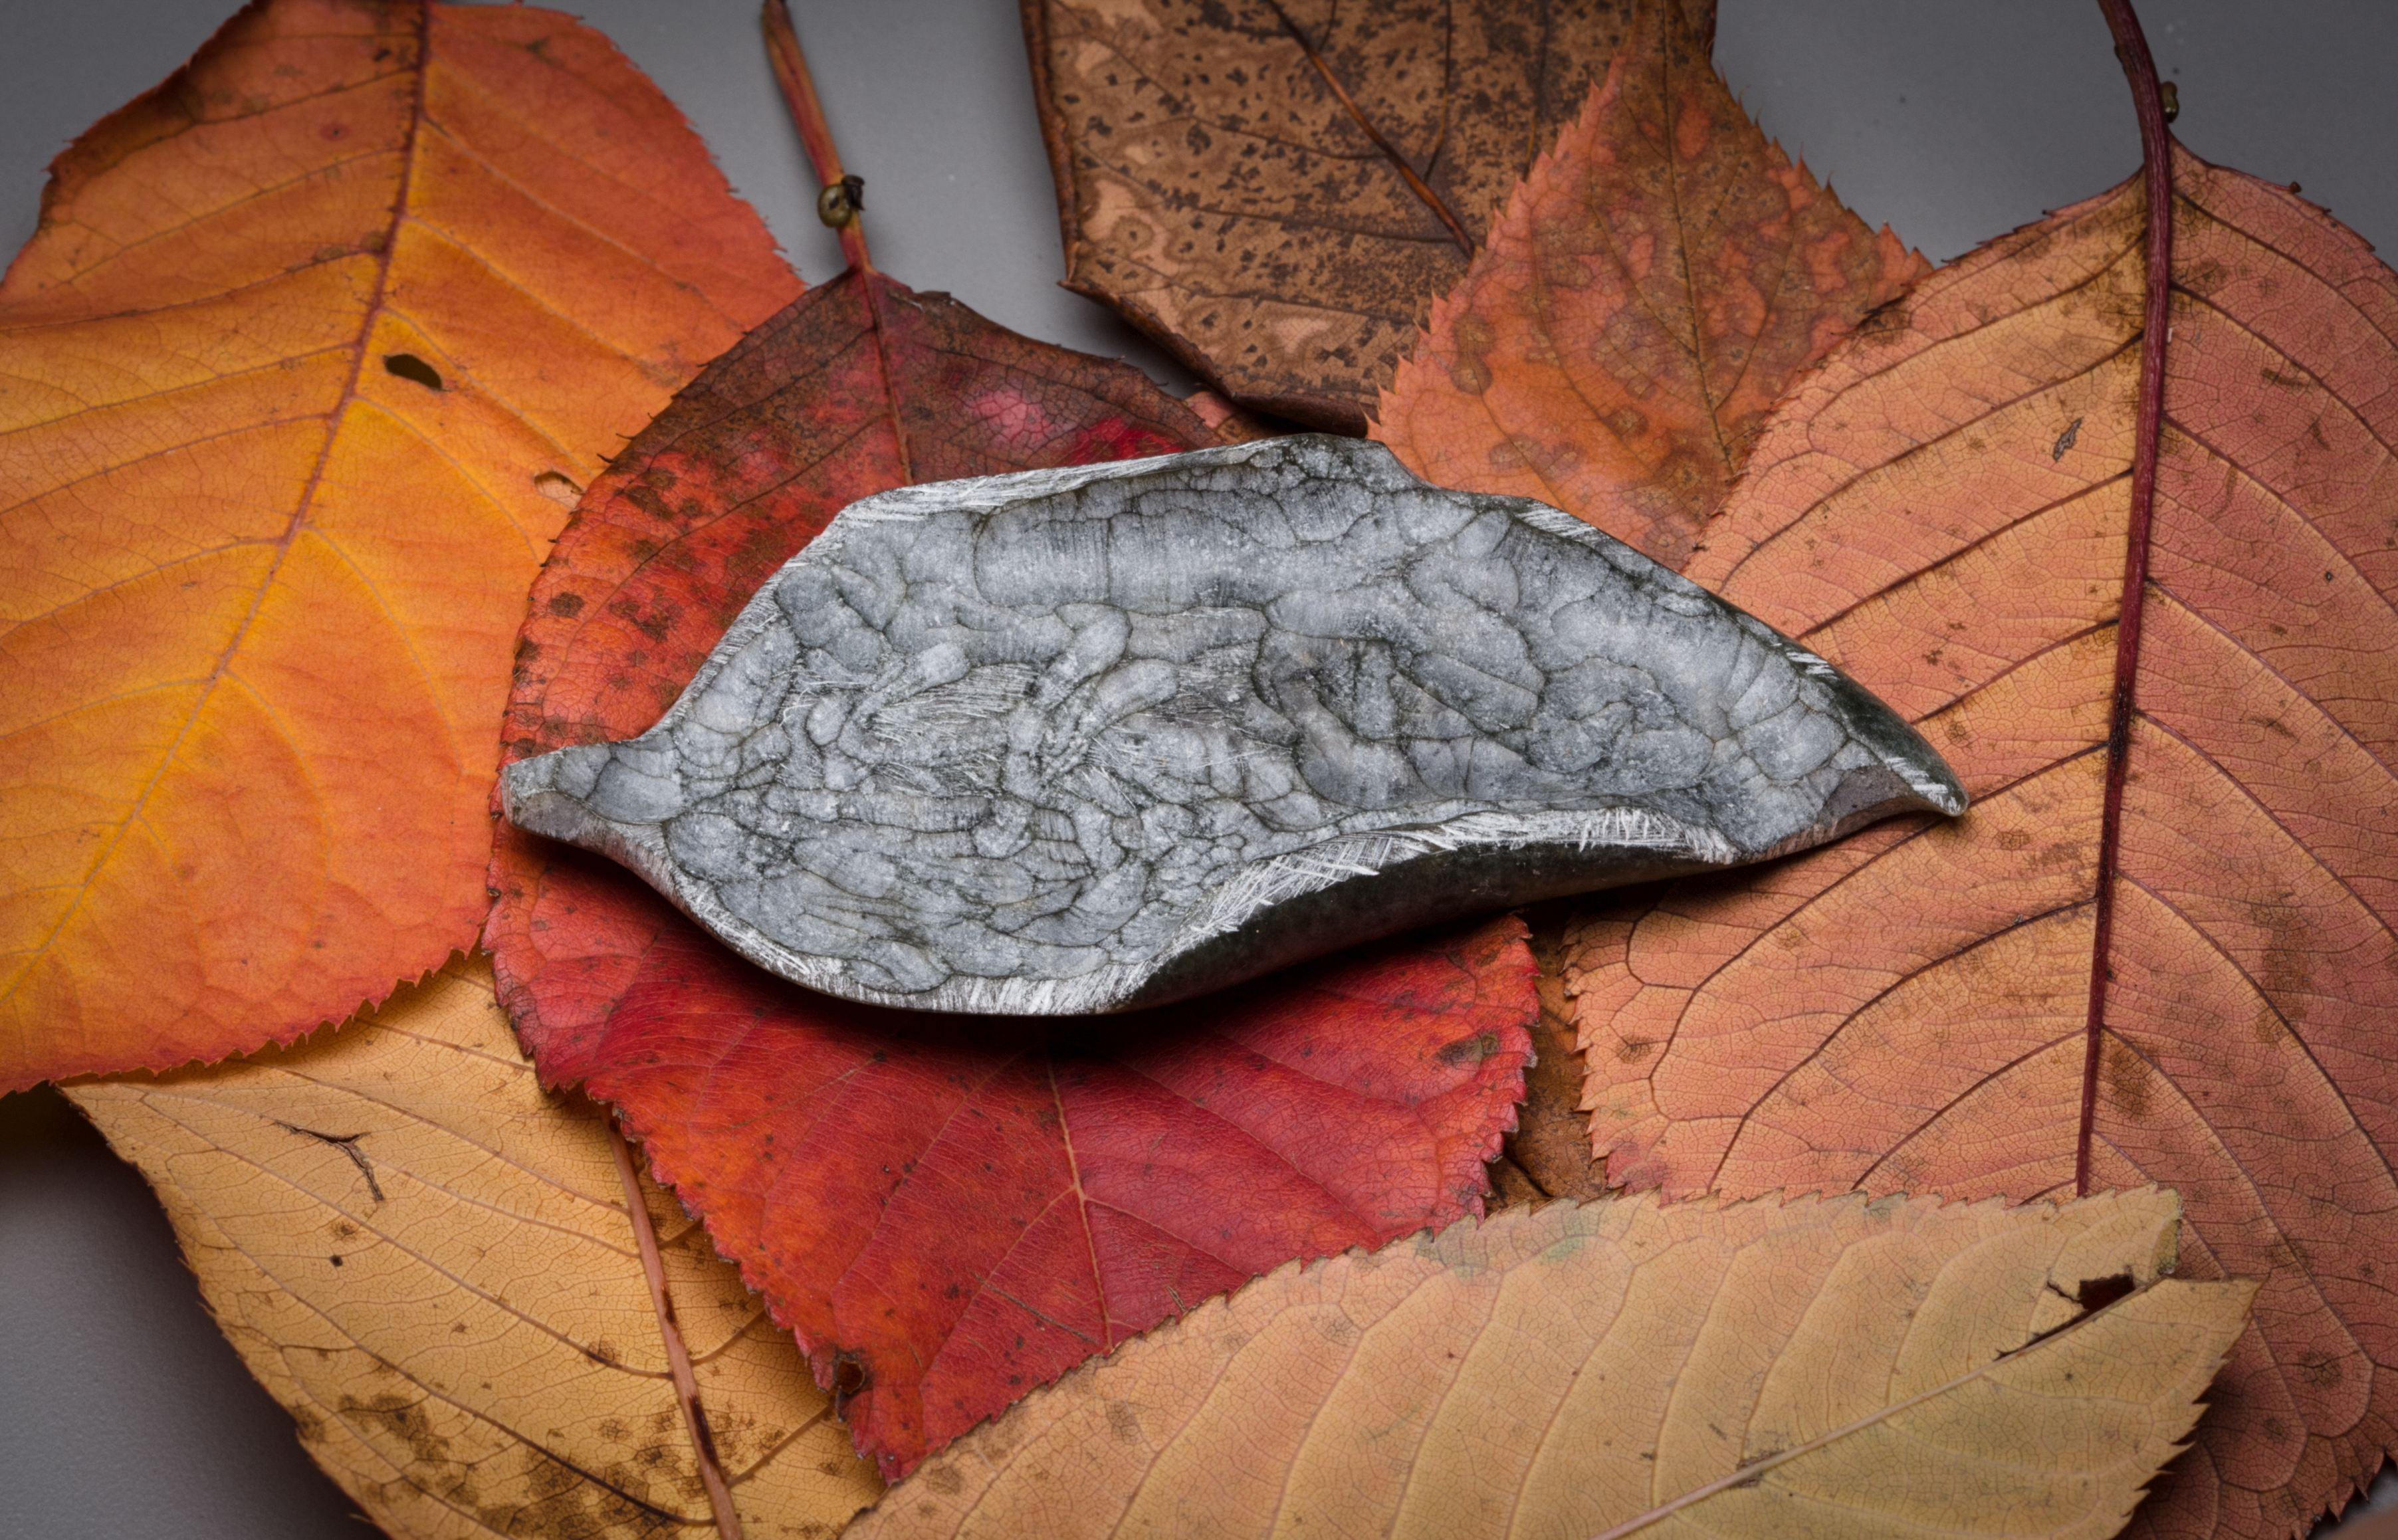 The top is textured and rubbed to mimic the veining of leaves, while the underside is polished to reveal rich greens and greys. Picking up and holding the sculpture is encouraged